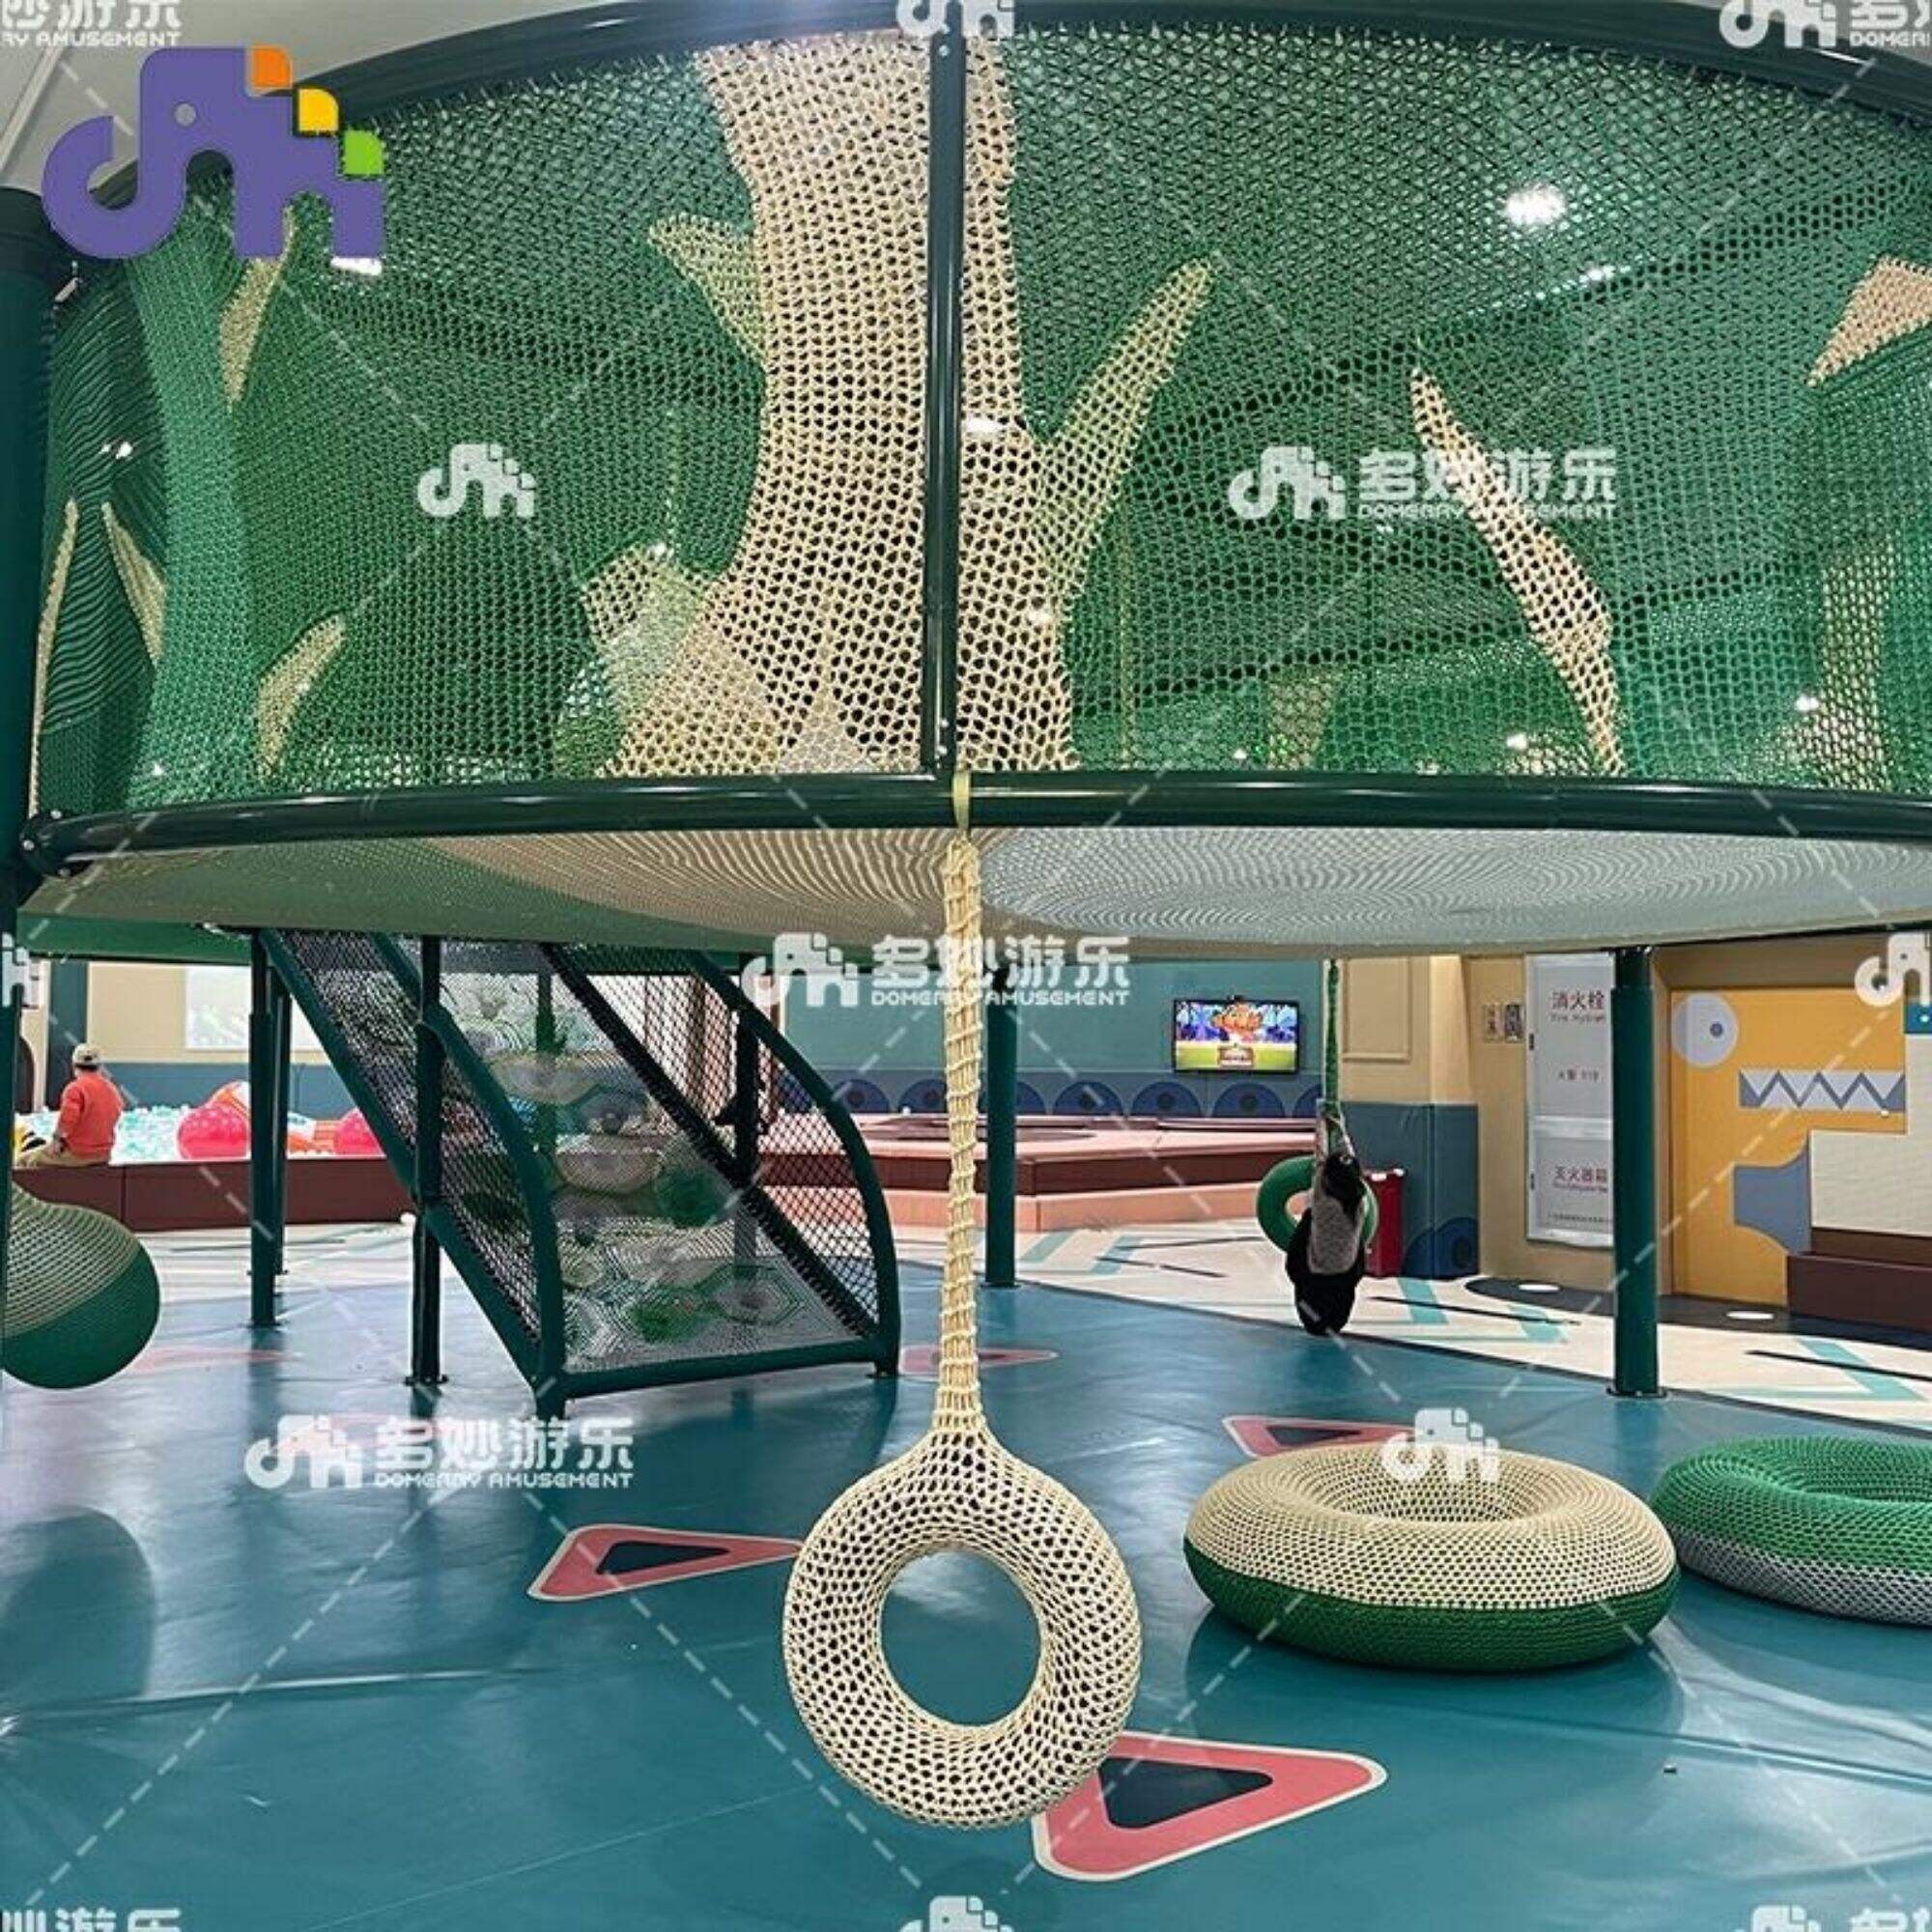 Indoor Nylon Climbing Jumping Net Baby-Friendly Playground Equipment for Home and School Use